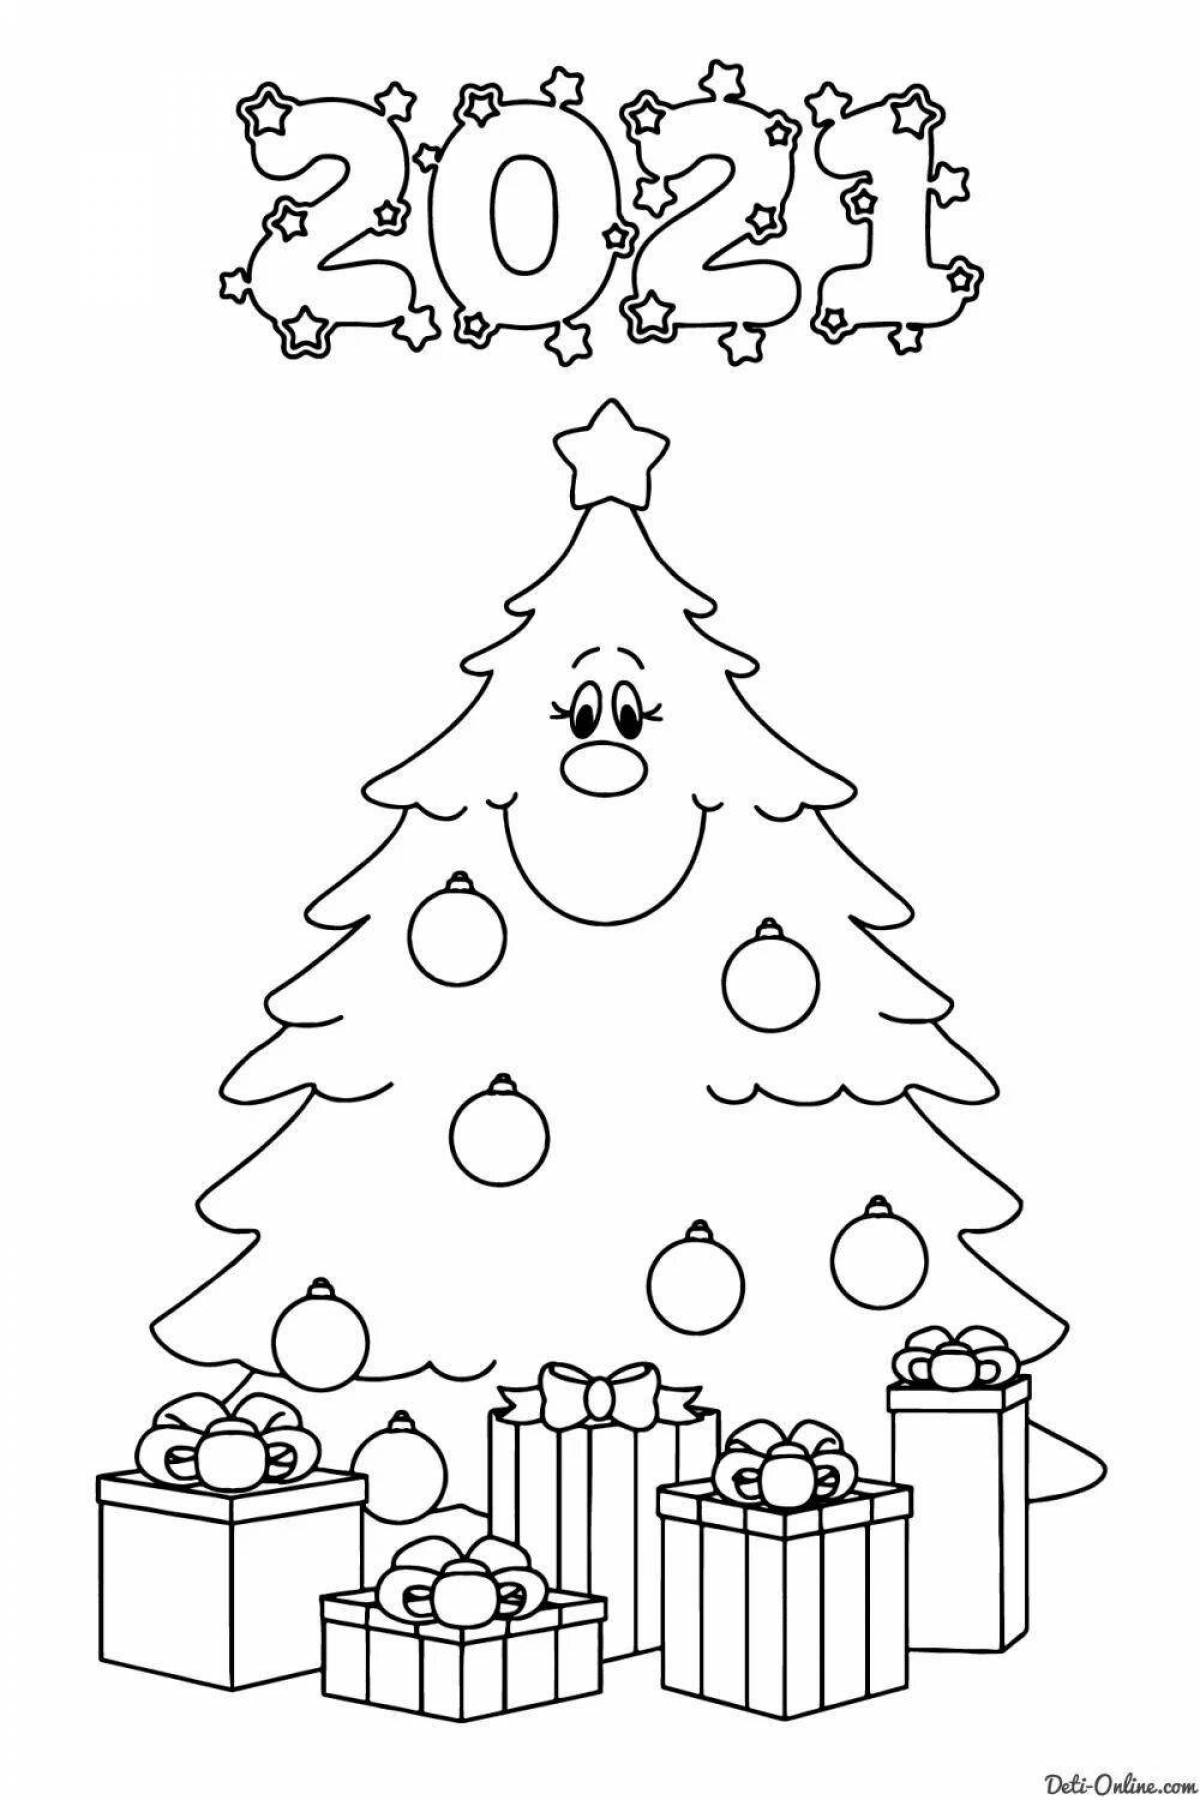 Decorated Christmas tree with balls for children